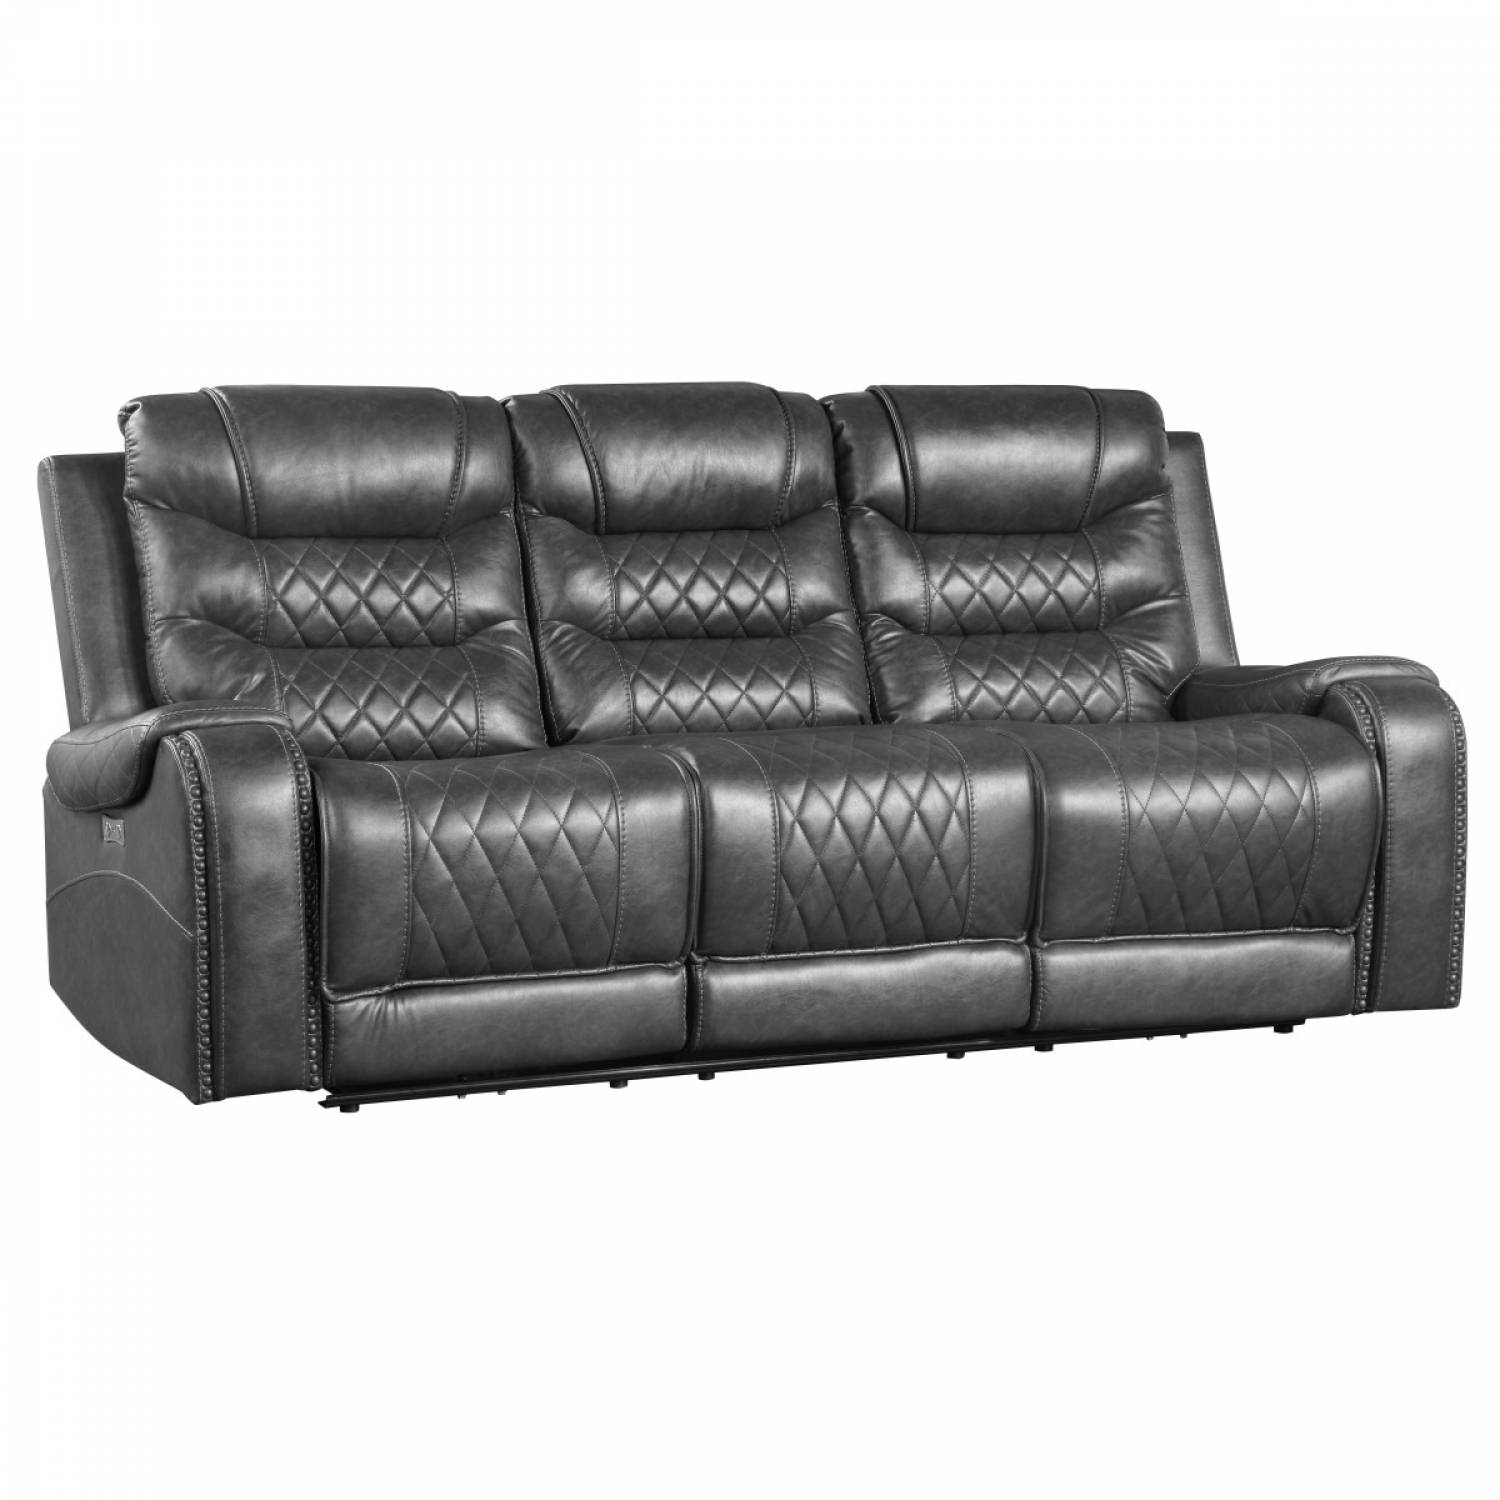 Reclining Sofa Sets With Cup Holders, Reclining Leather Sofa Sets With Cup Holders